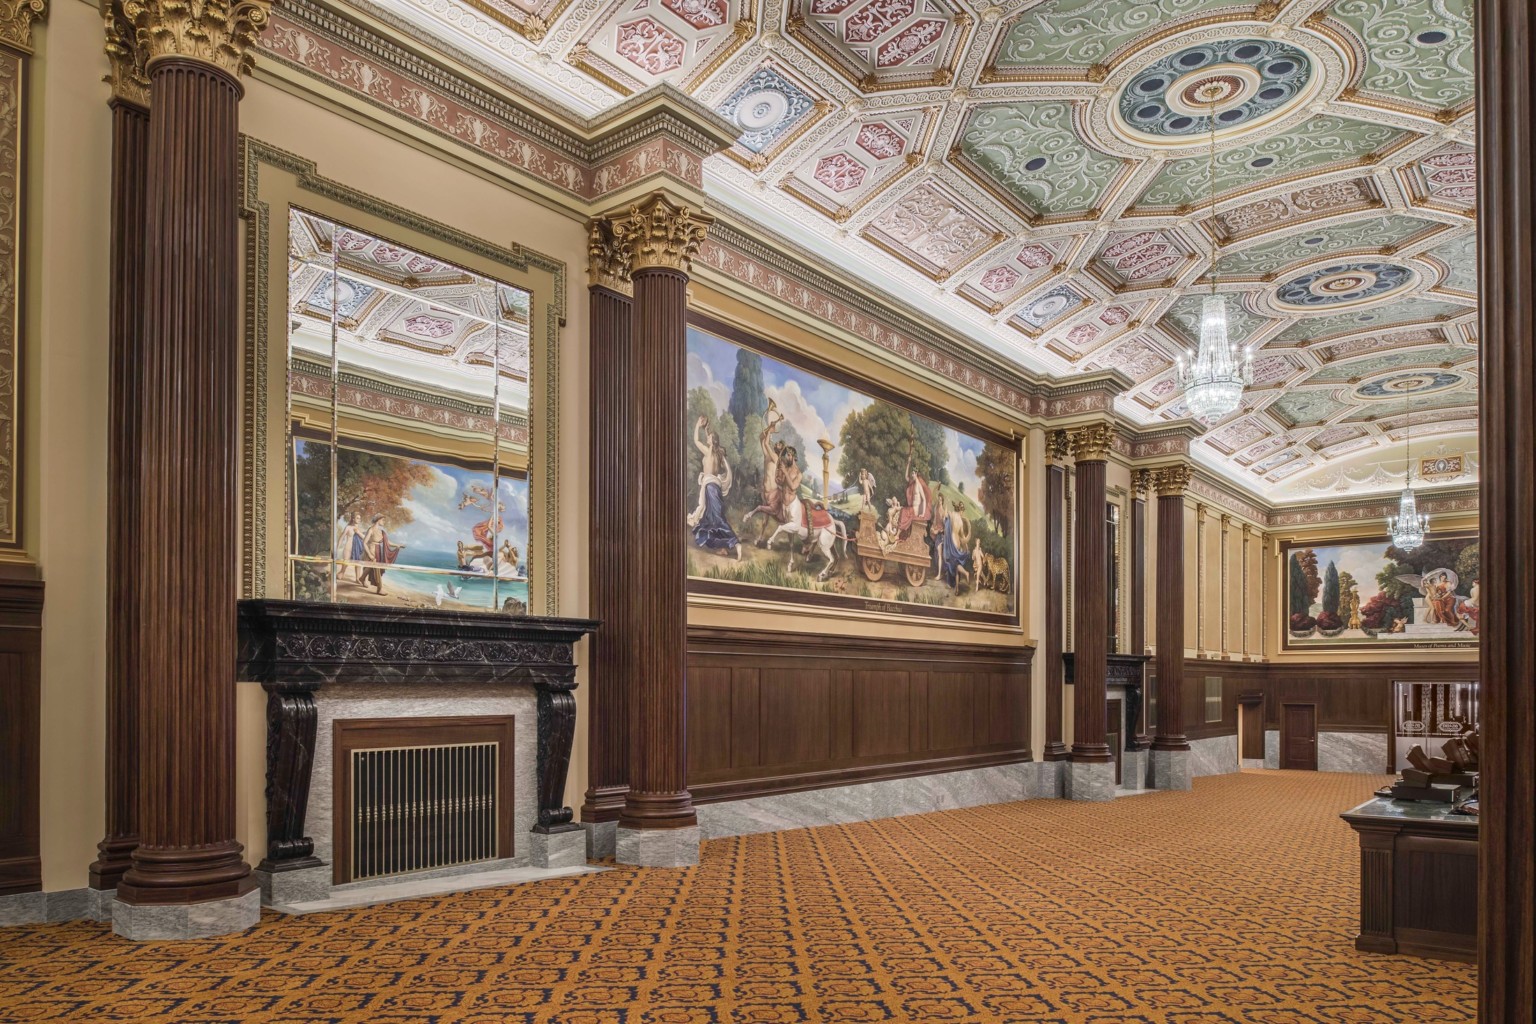 carpeted hallway with corinthian columns and colorful ceiling frescoes and large scale wall murals